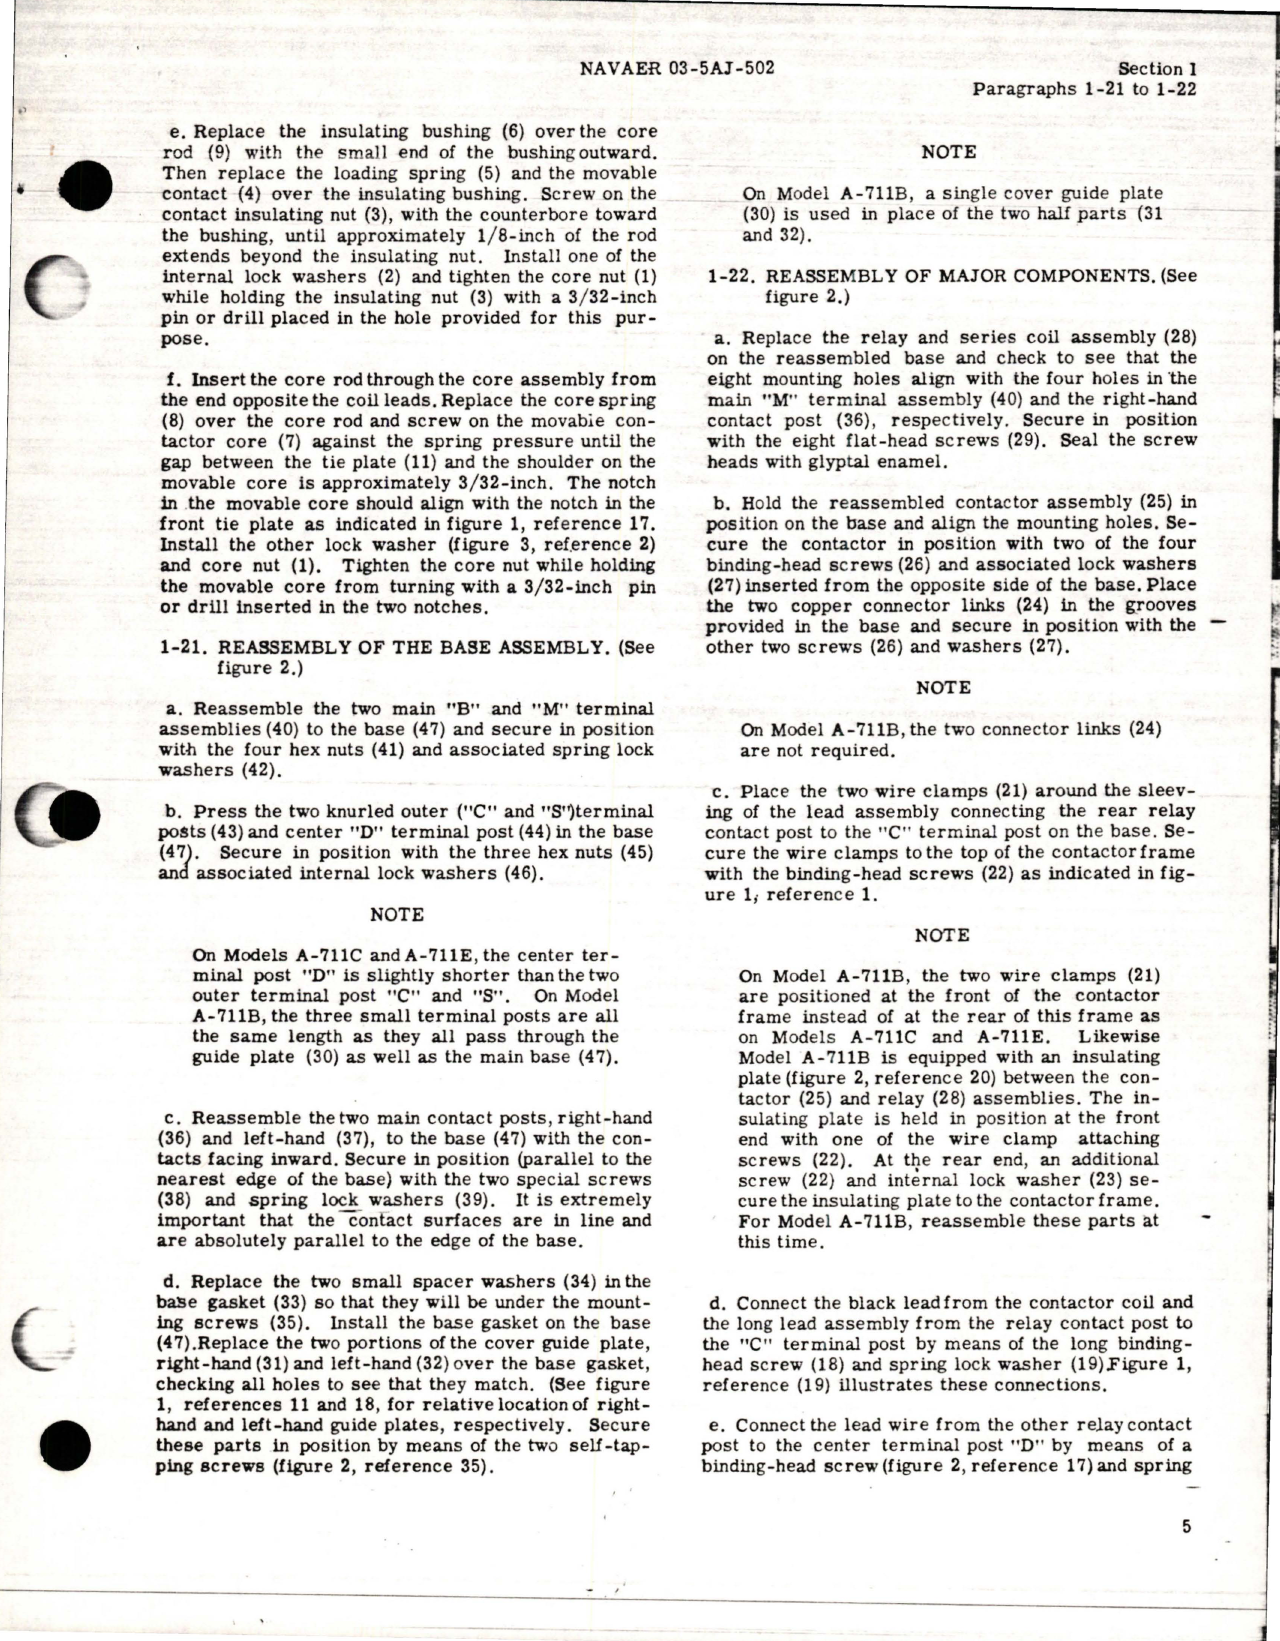 Sample page 7 from AirCorps Library document: Overhaul Instructions with Parts for Starter Relays - Models A-711B, A-711C and A-711E